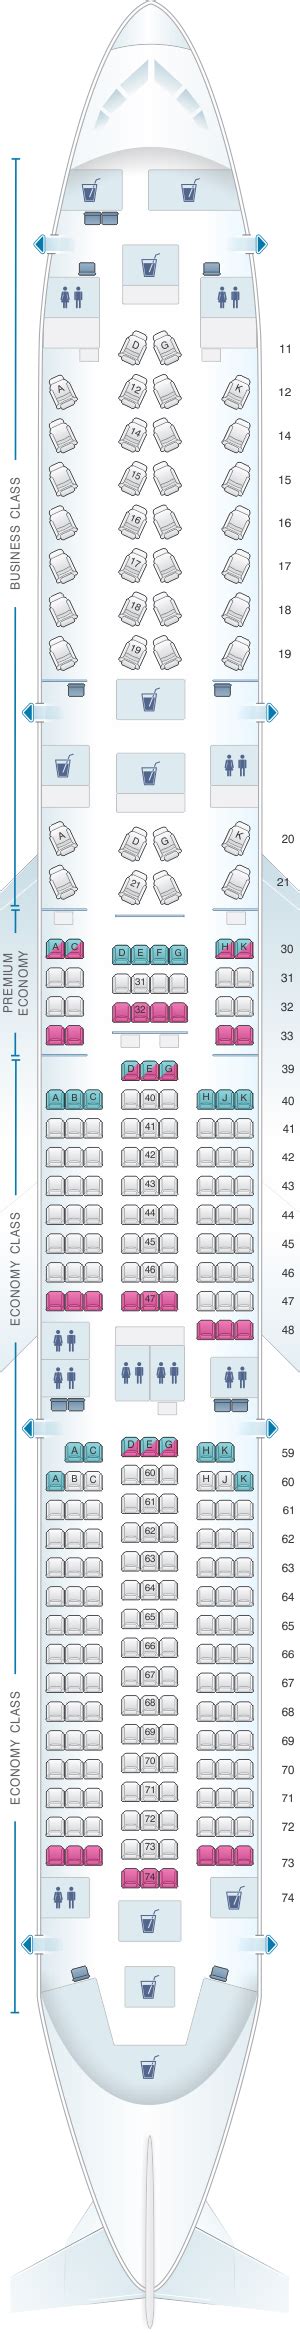 Seat Map Cathay Pacific Airways Airbus A350 900 35g